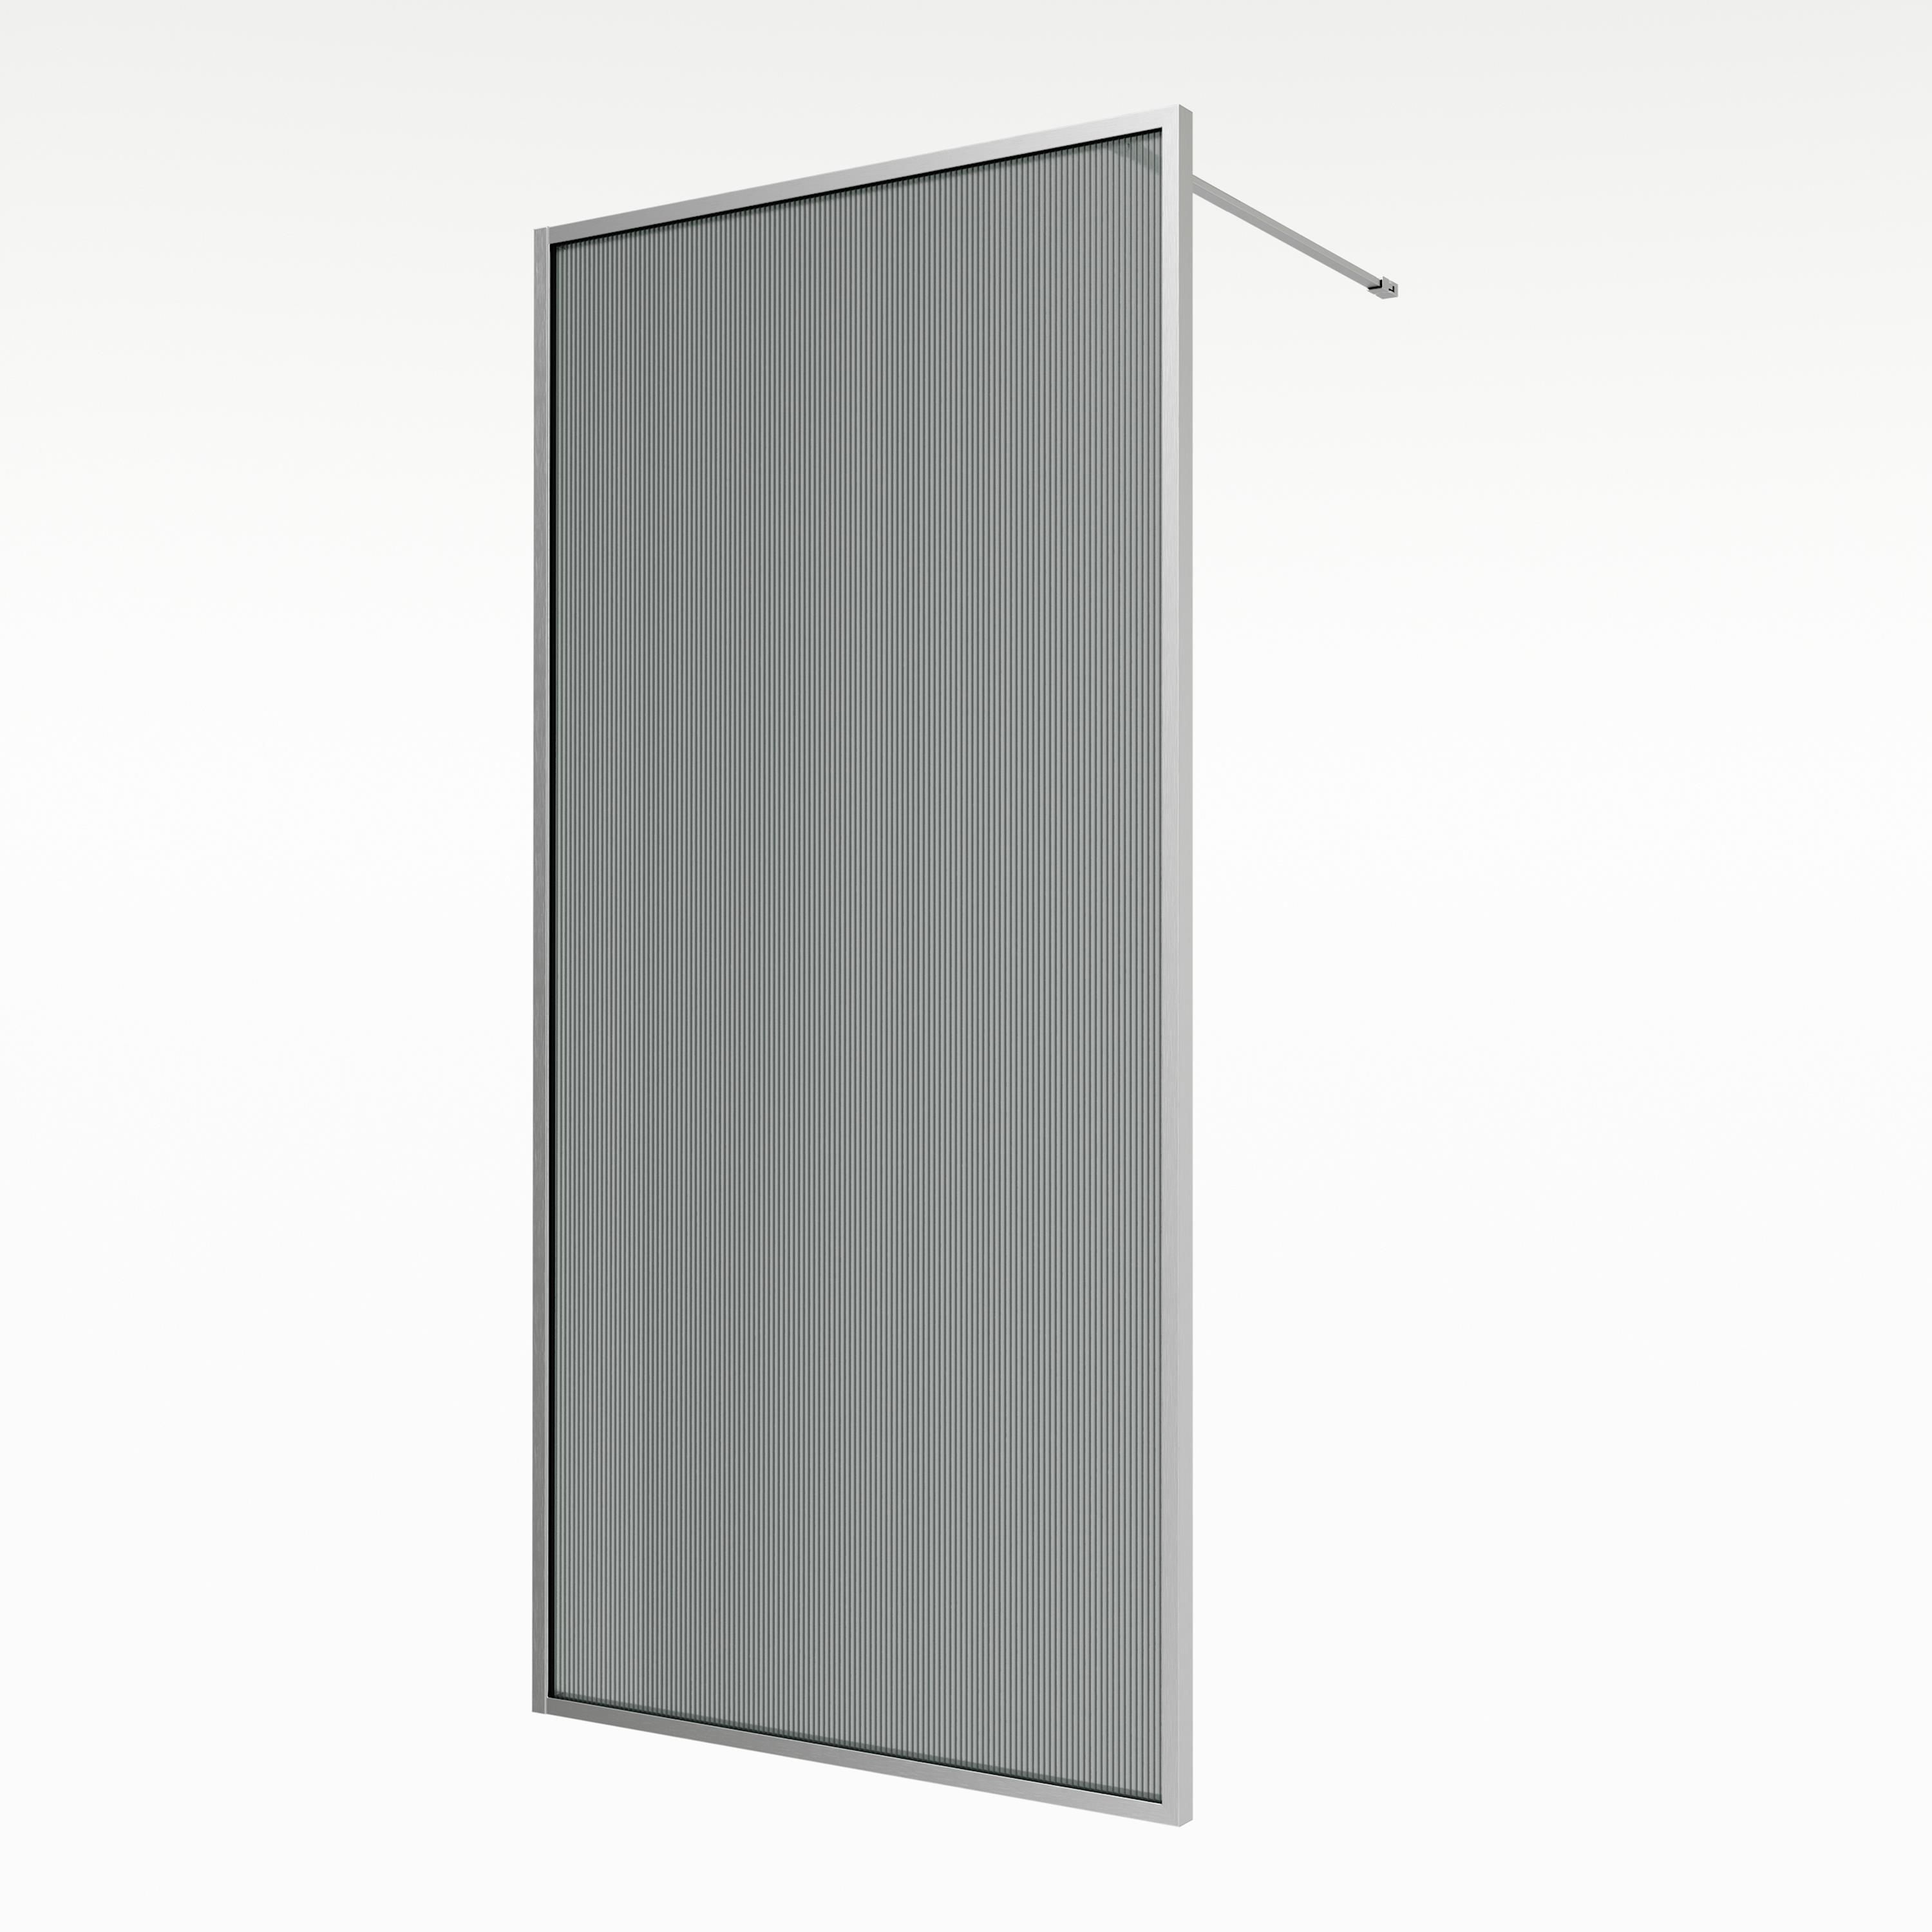 Aqualux AQ PRO Polished Silver Fluted Single Wet room glass screen (H)200cm (W)120cm